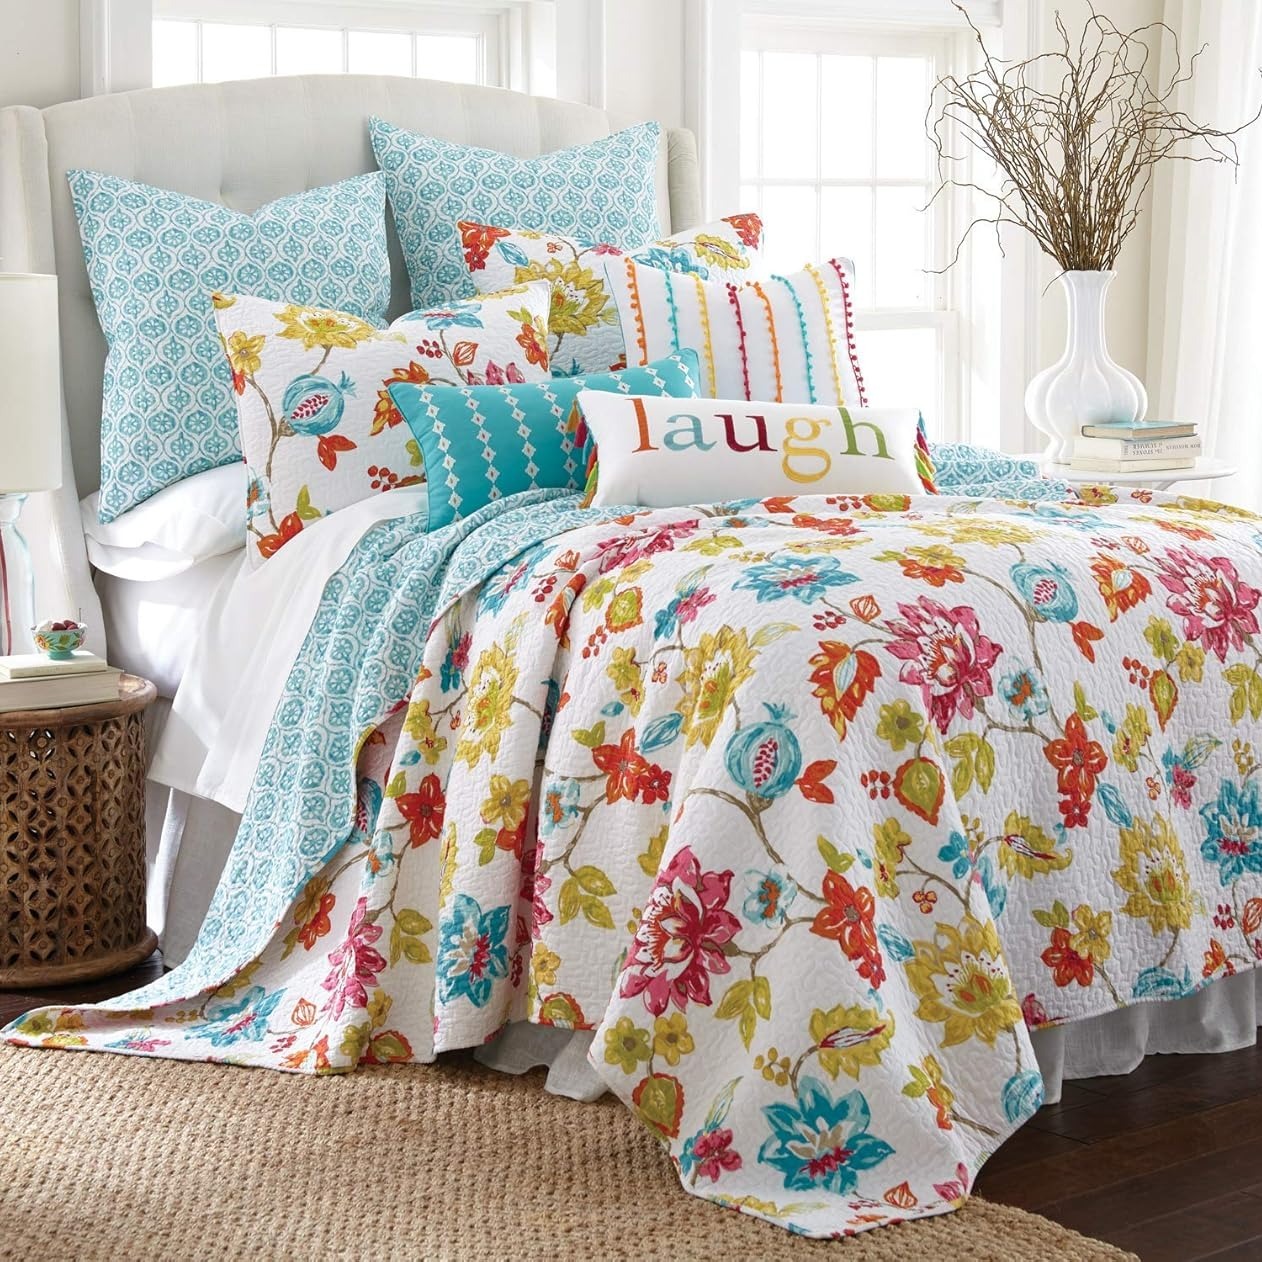 

Vivid Tropical Colorful Floral Garden 3-piece Reversible Quilt Bedding Set, Lightweight Bedspread Coverlet For All Seasons